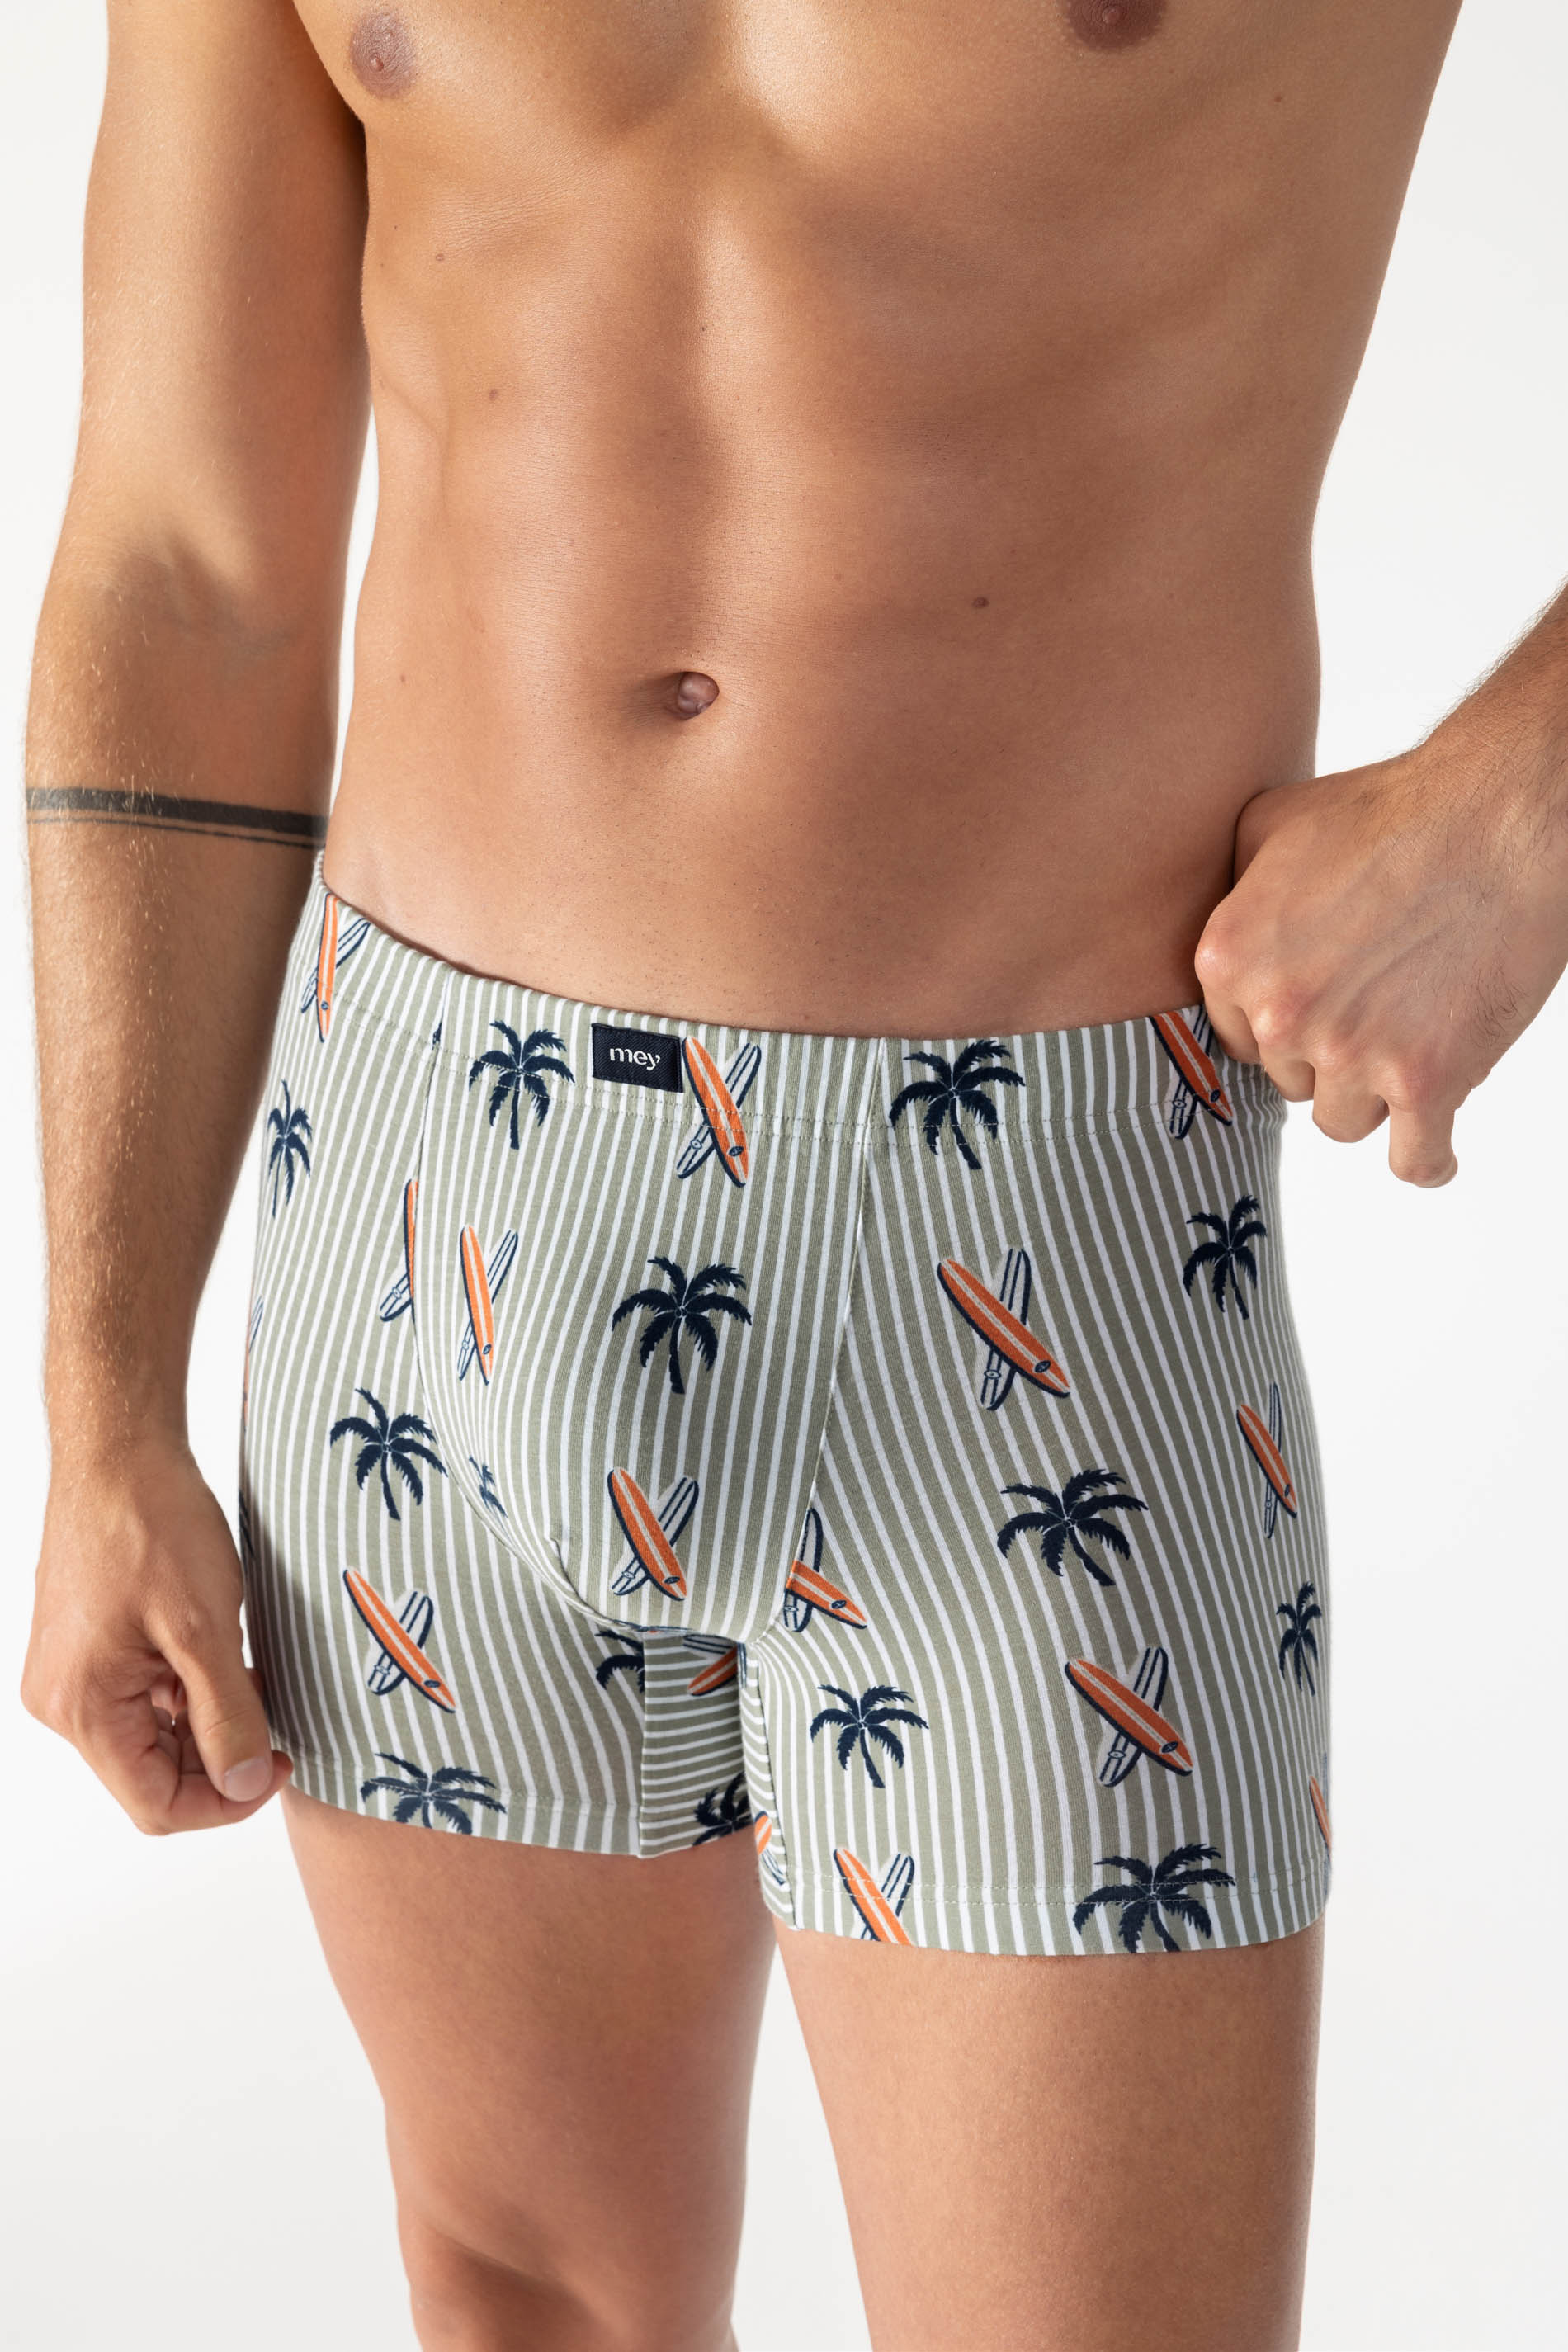 Long shorties Serie Palm Tree Detail View 02 | mey®